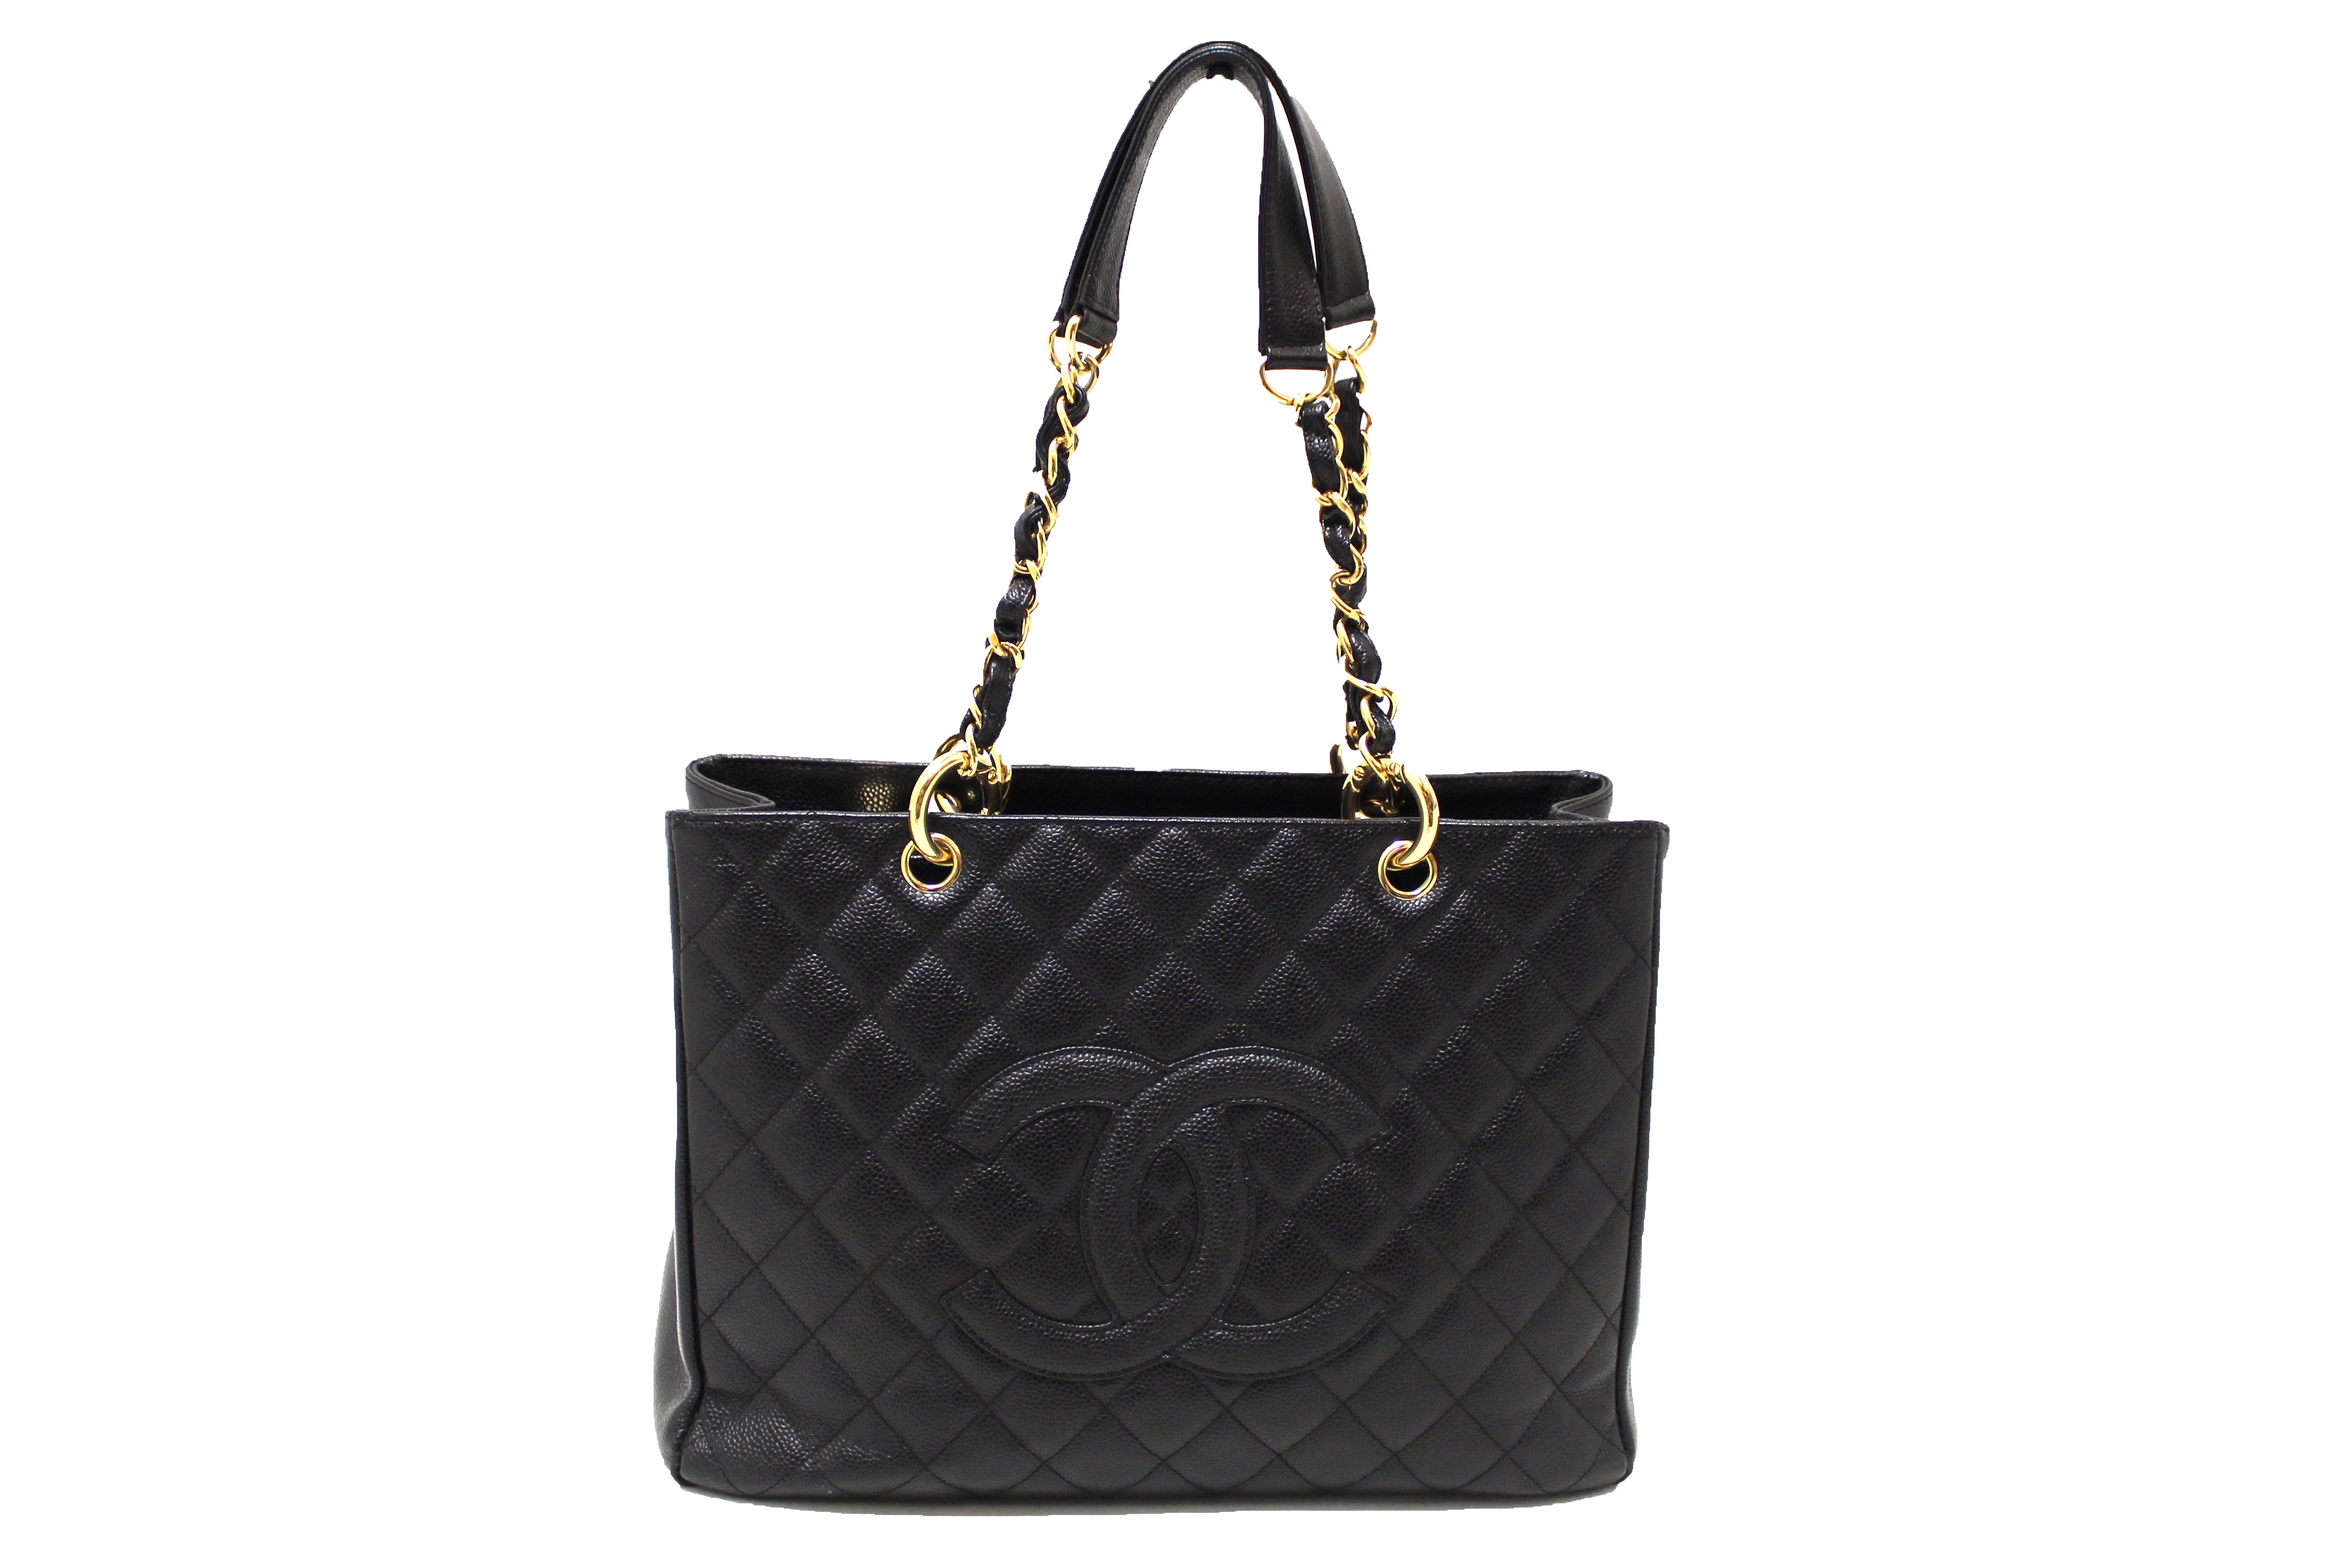 Authentic Chanel Black Quilted Caviar Leather Grand Shopper Tote